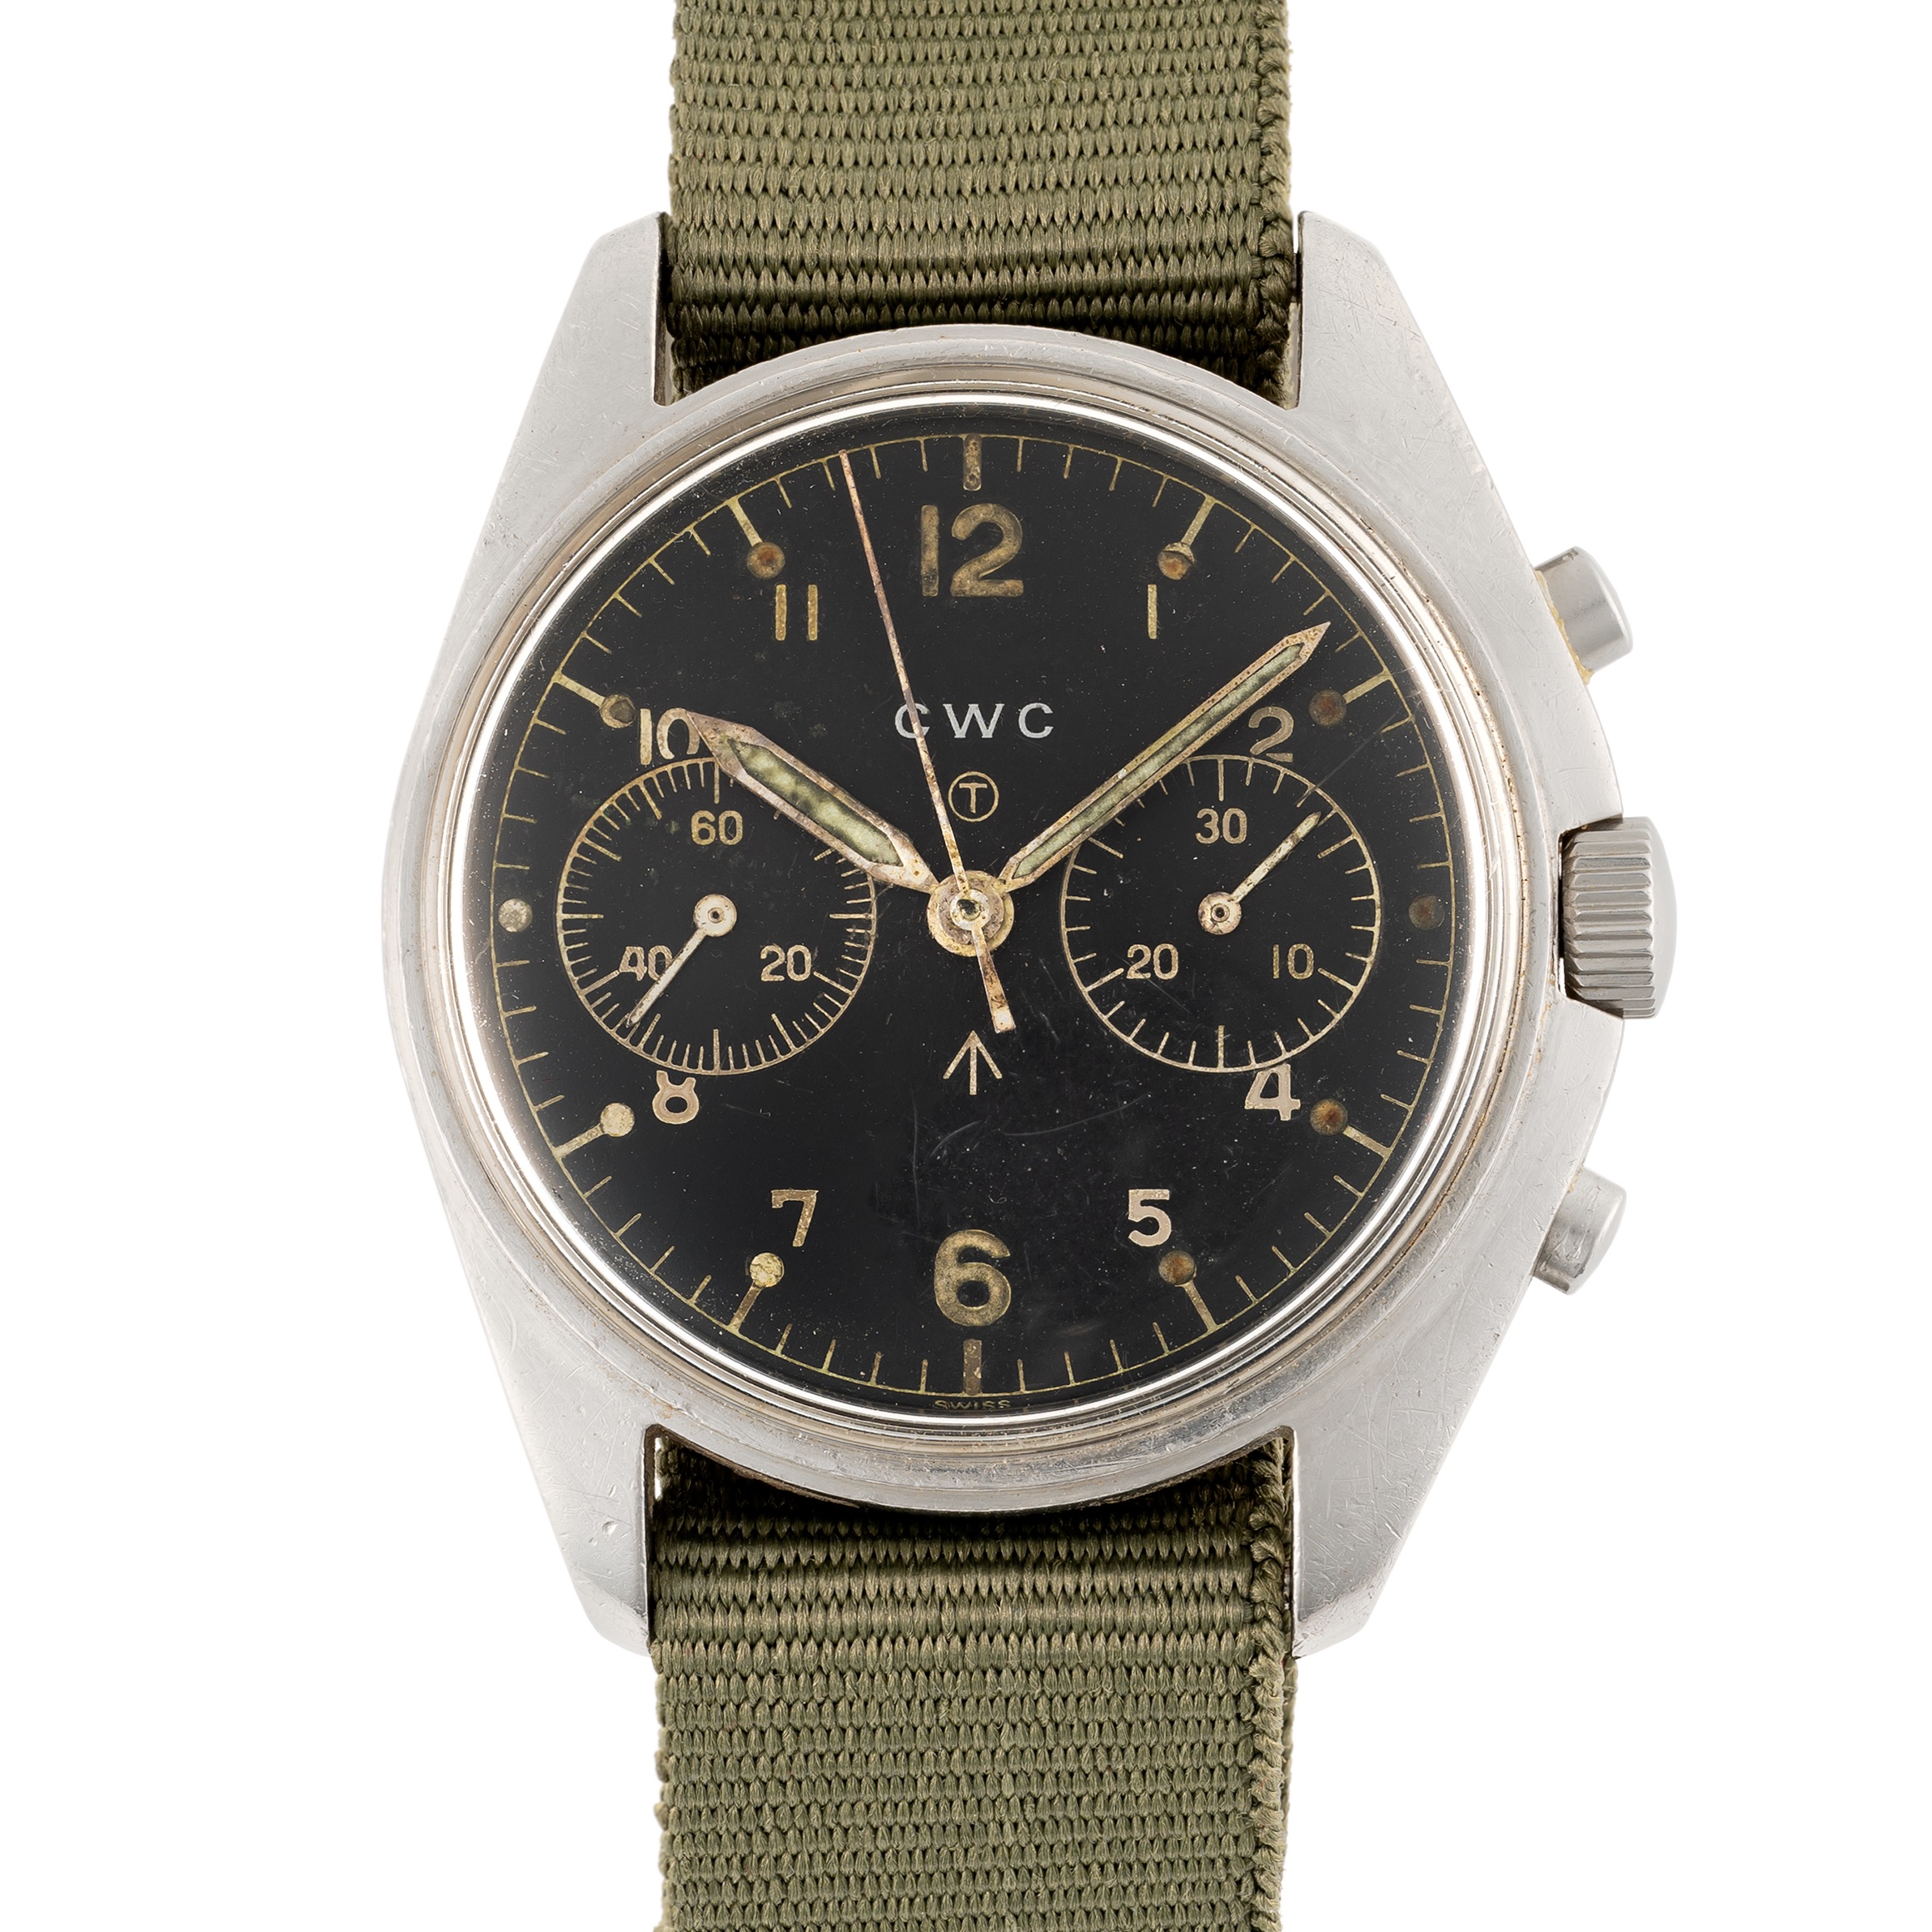 A GENTLEMAN'S STAINLESS STEEL BRITISH MILITARY CWC ROYAL NAVY PILOTS CHRONOGRAPH WRIST WATCH DATED